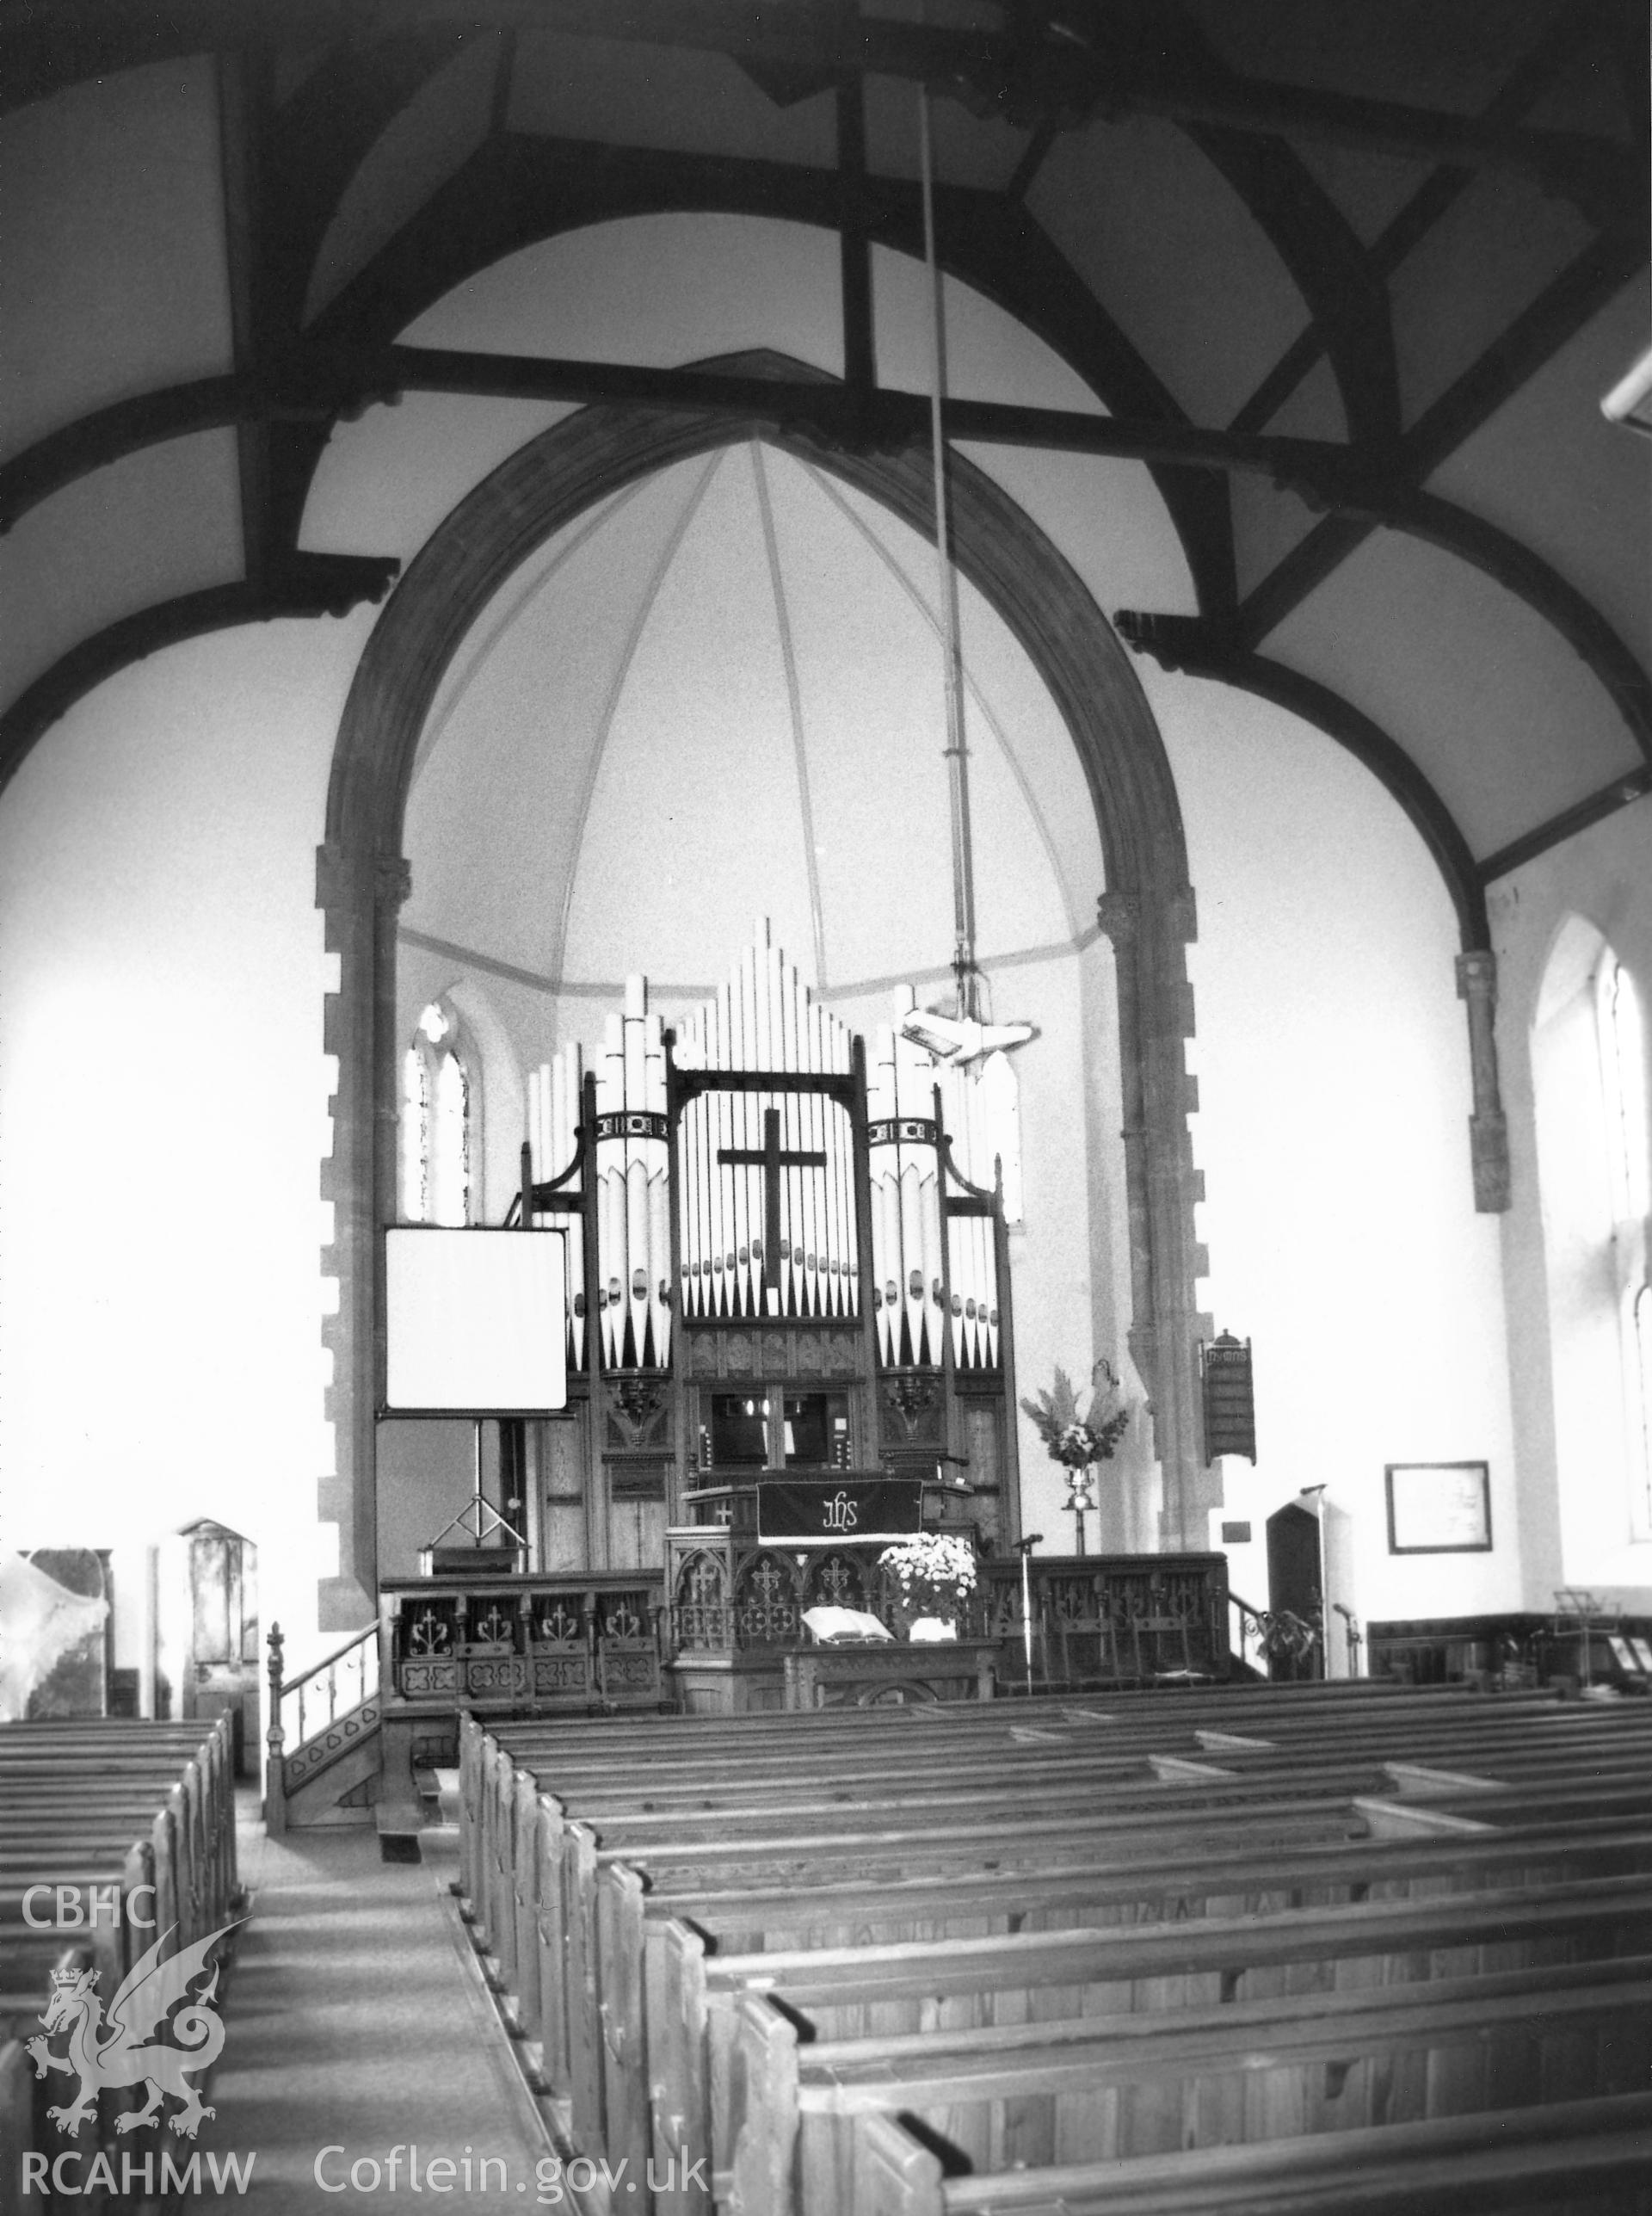 Digital copy of a black and white photograph showing an interior view of Deer Park Baptist Chapel, Tenby, taken by Robert Scourfield, 1995.